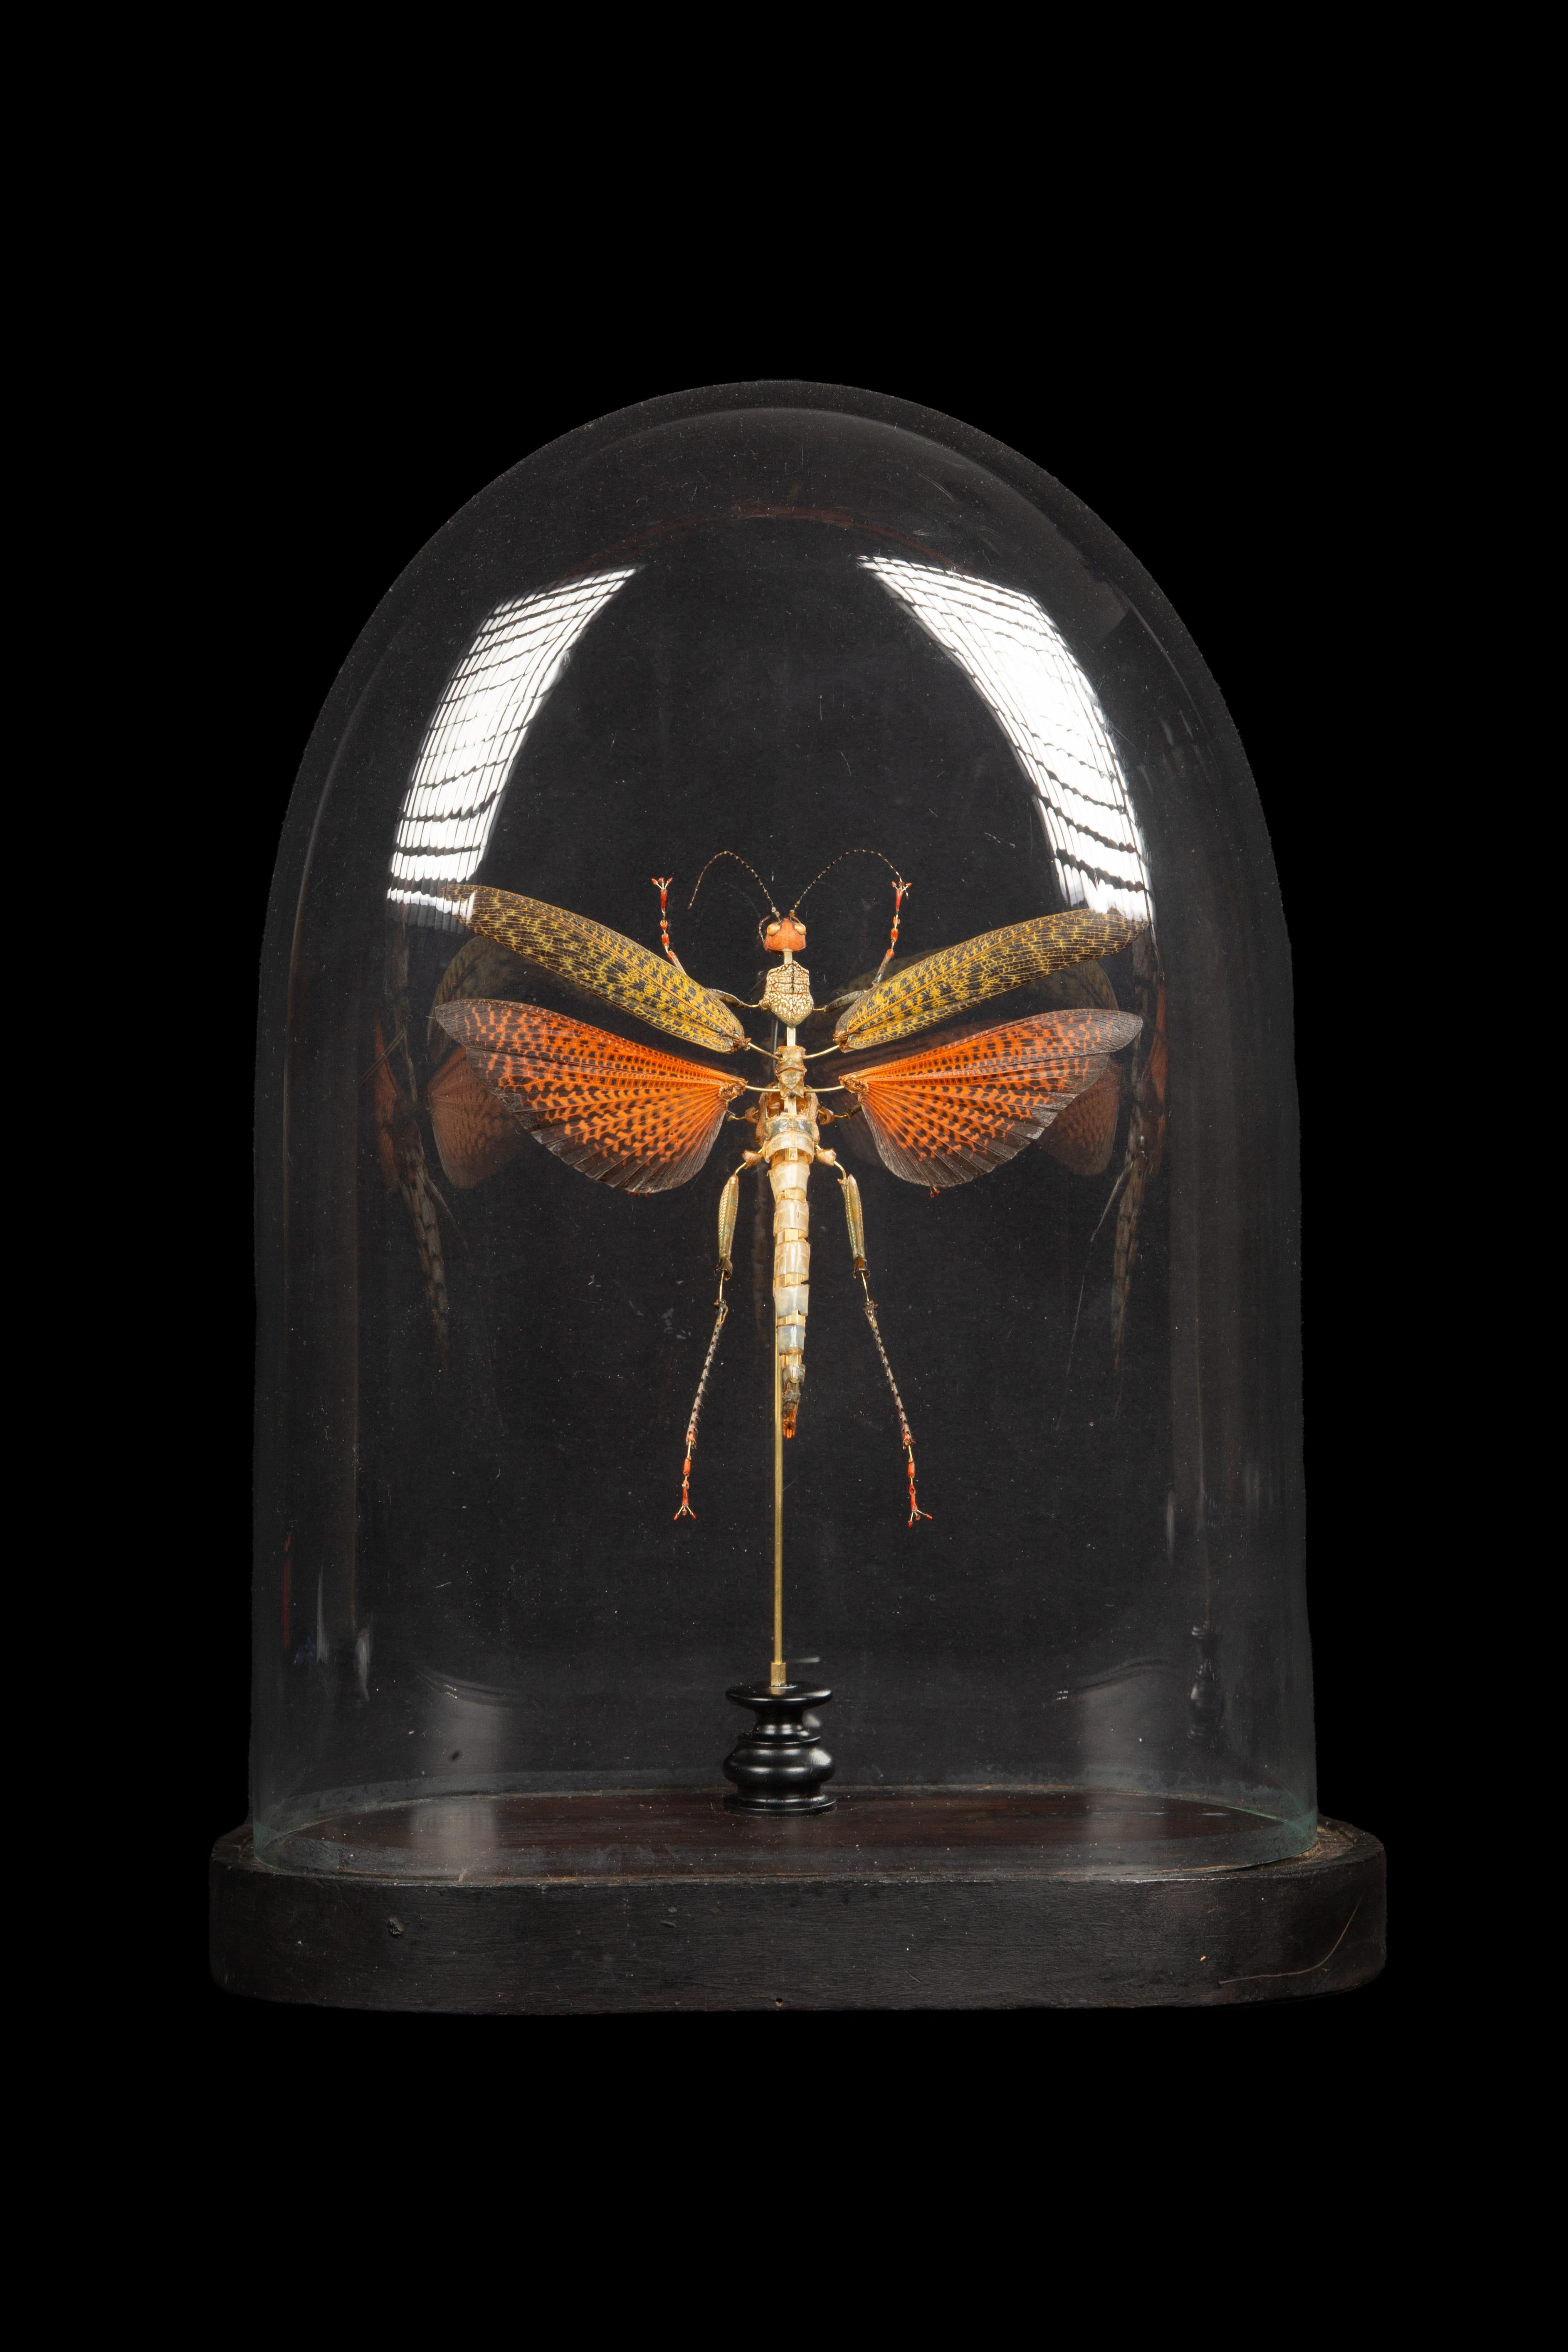 Giant Deconstructed Grass Hopper (Tropidacris dux) under an antique glass dome.

Tropidacris belongs to the Romaleidae family and is a genus of grasshoppers found in Central and Southern America. These grasshoppers are known for their impressive